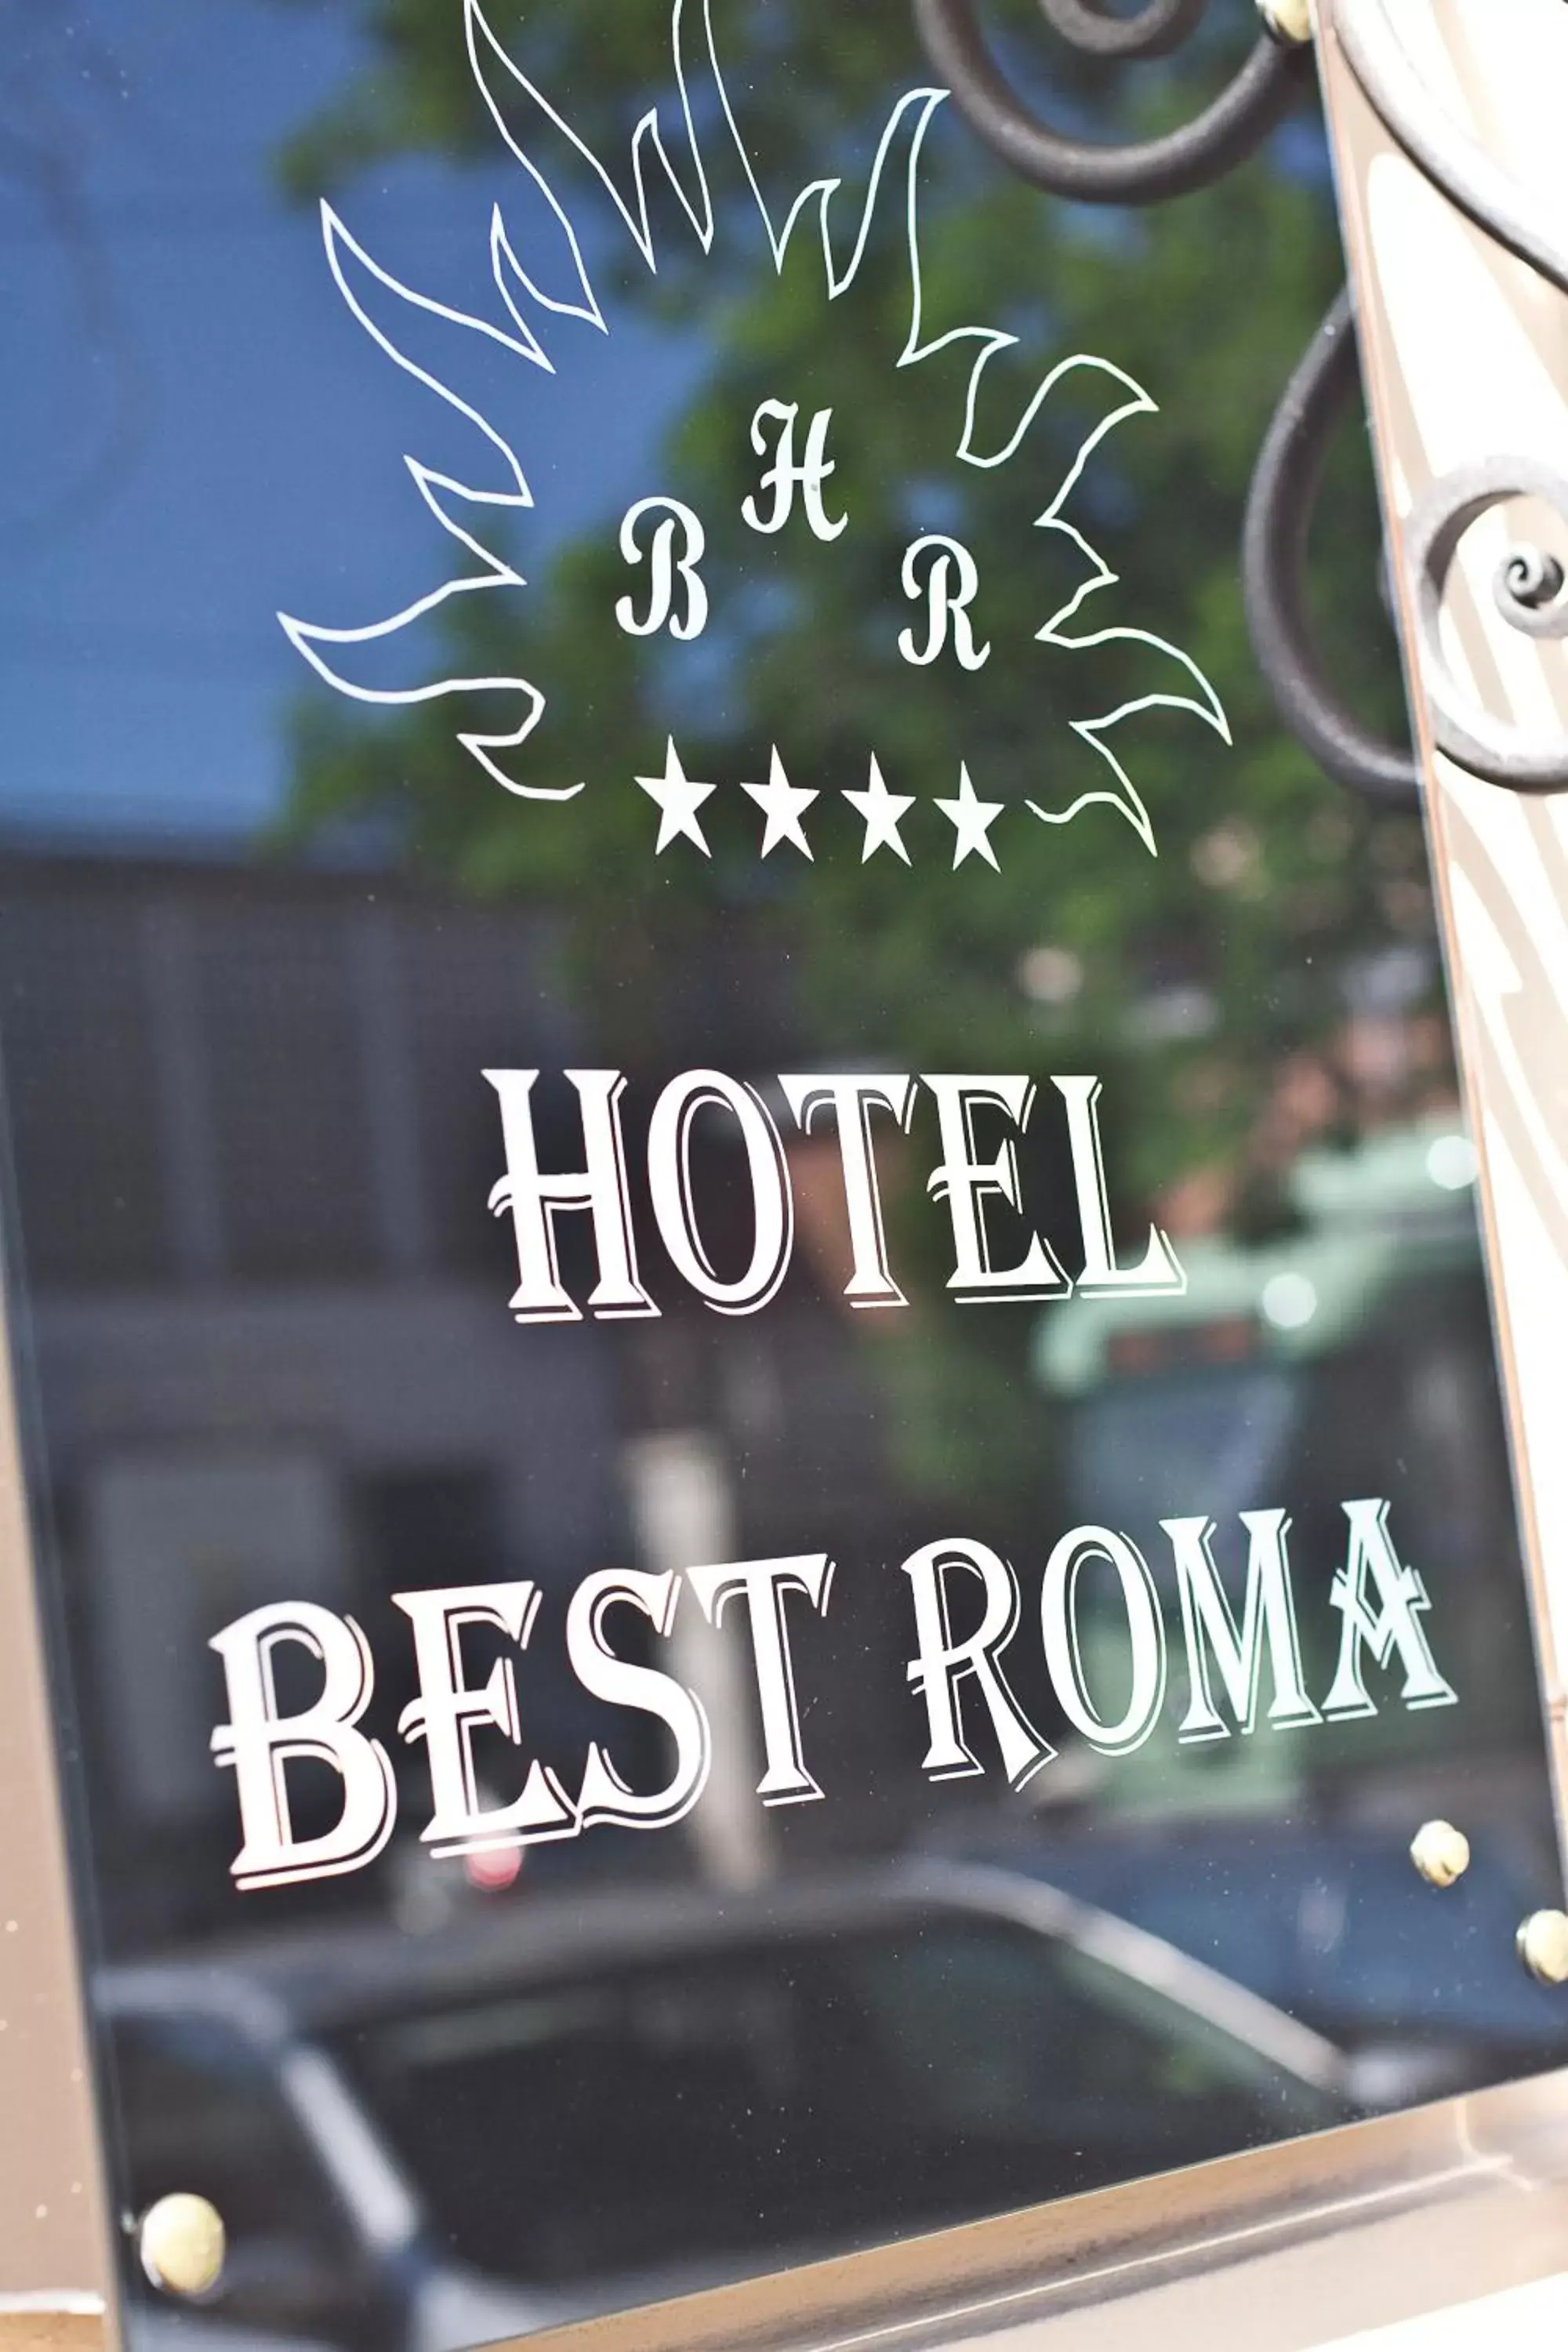 Facade/entrance in Hotel Best Roma